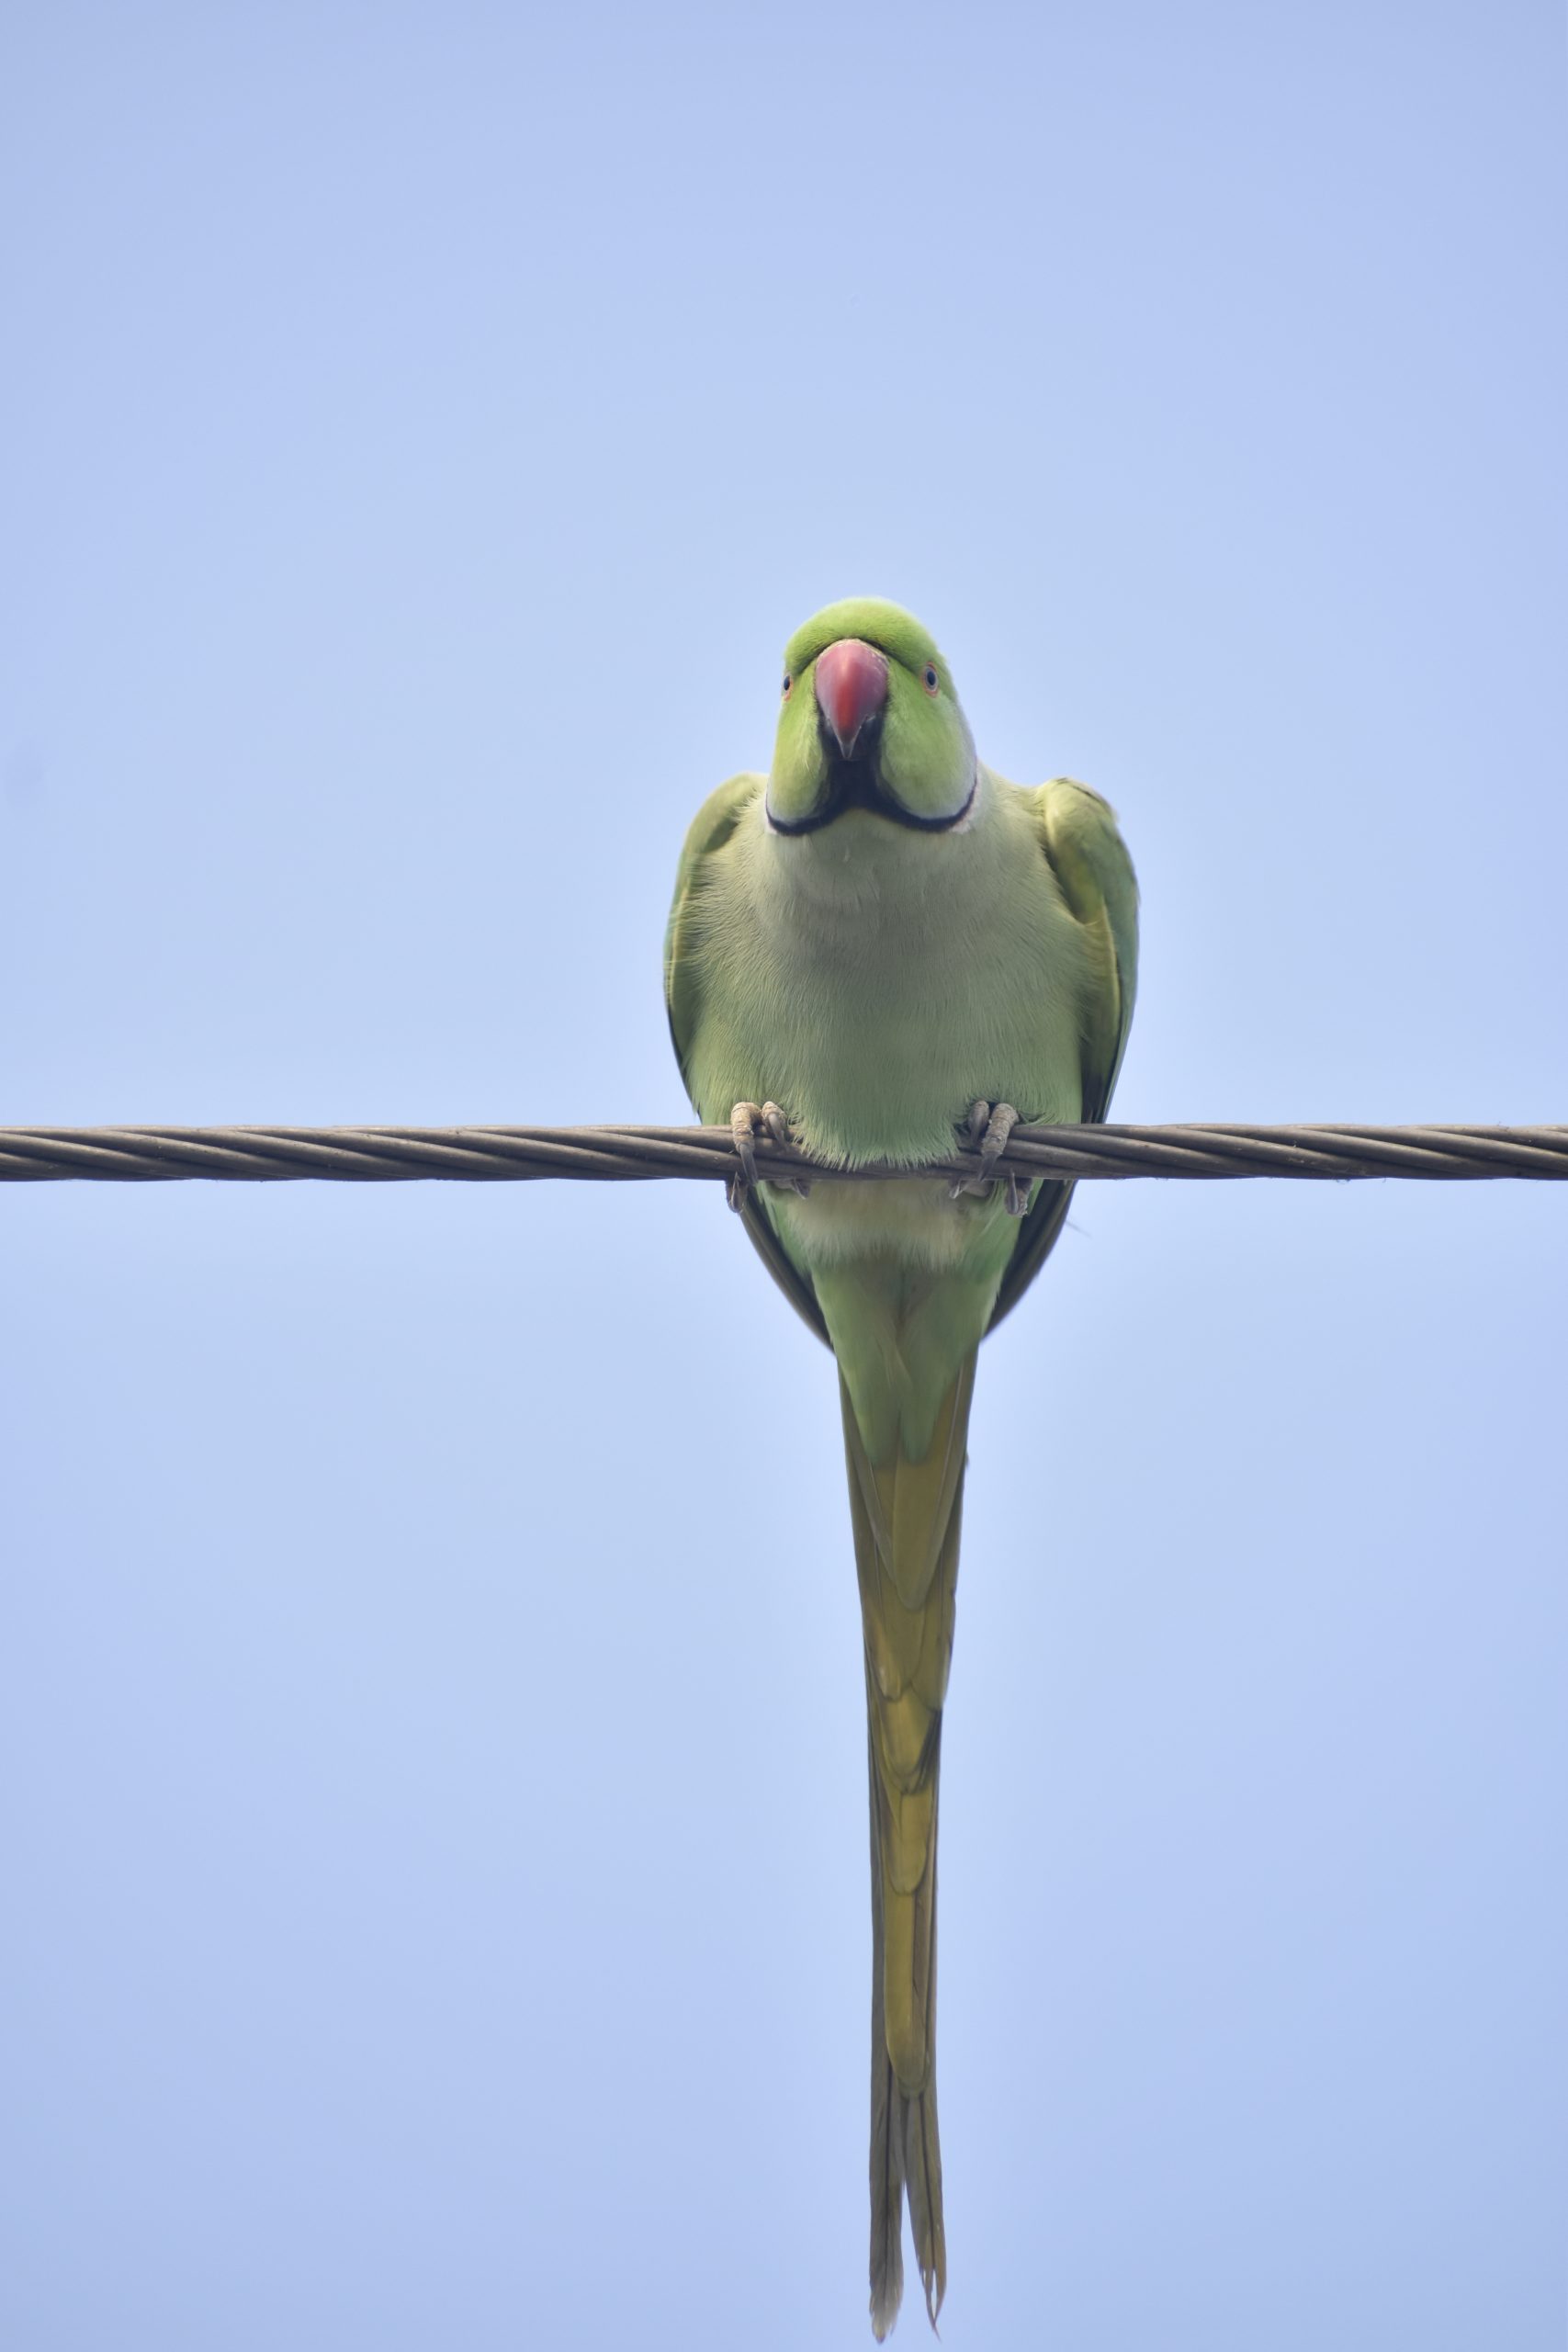 A parrot sitting on electric wire